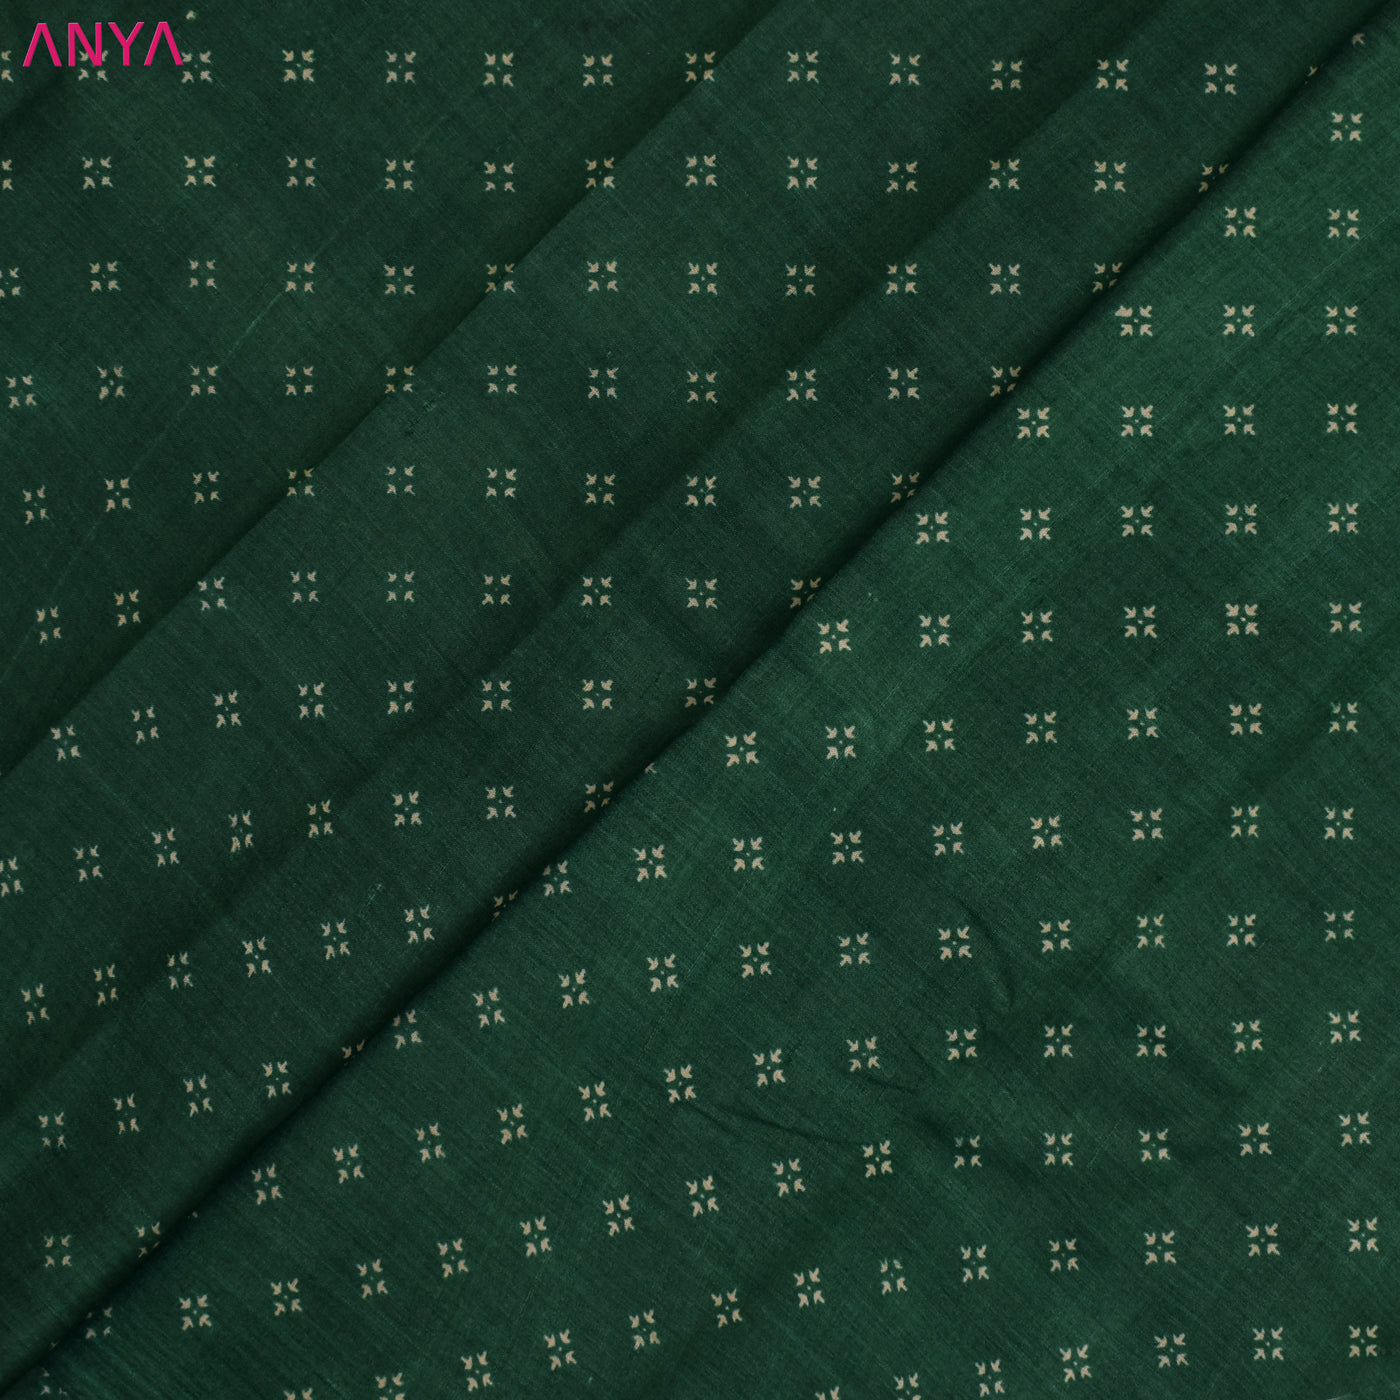 Bottle Green Tussar Silk Fabric with Printed Design